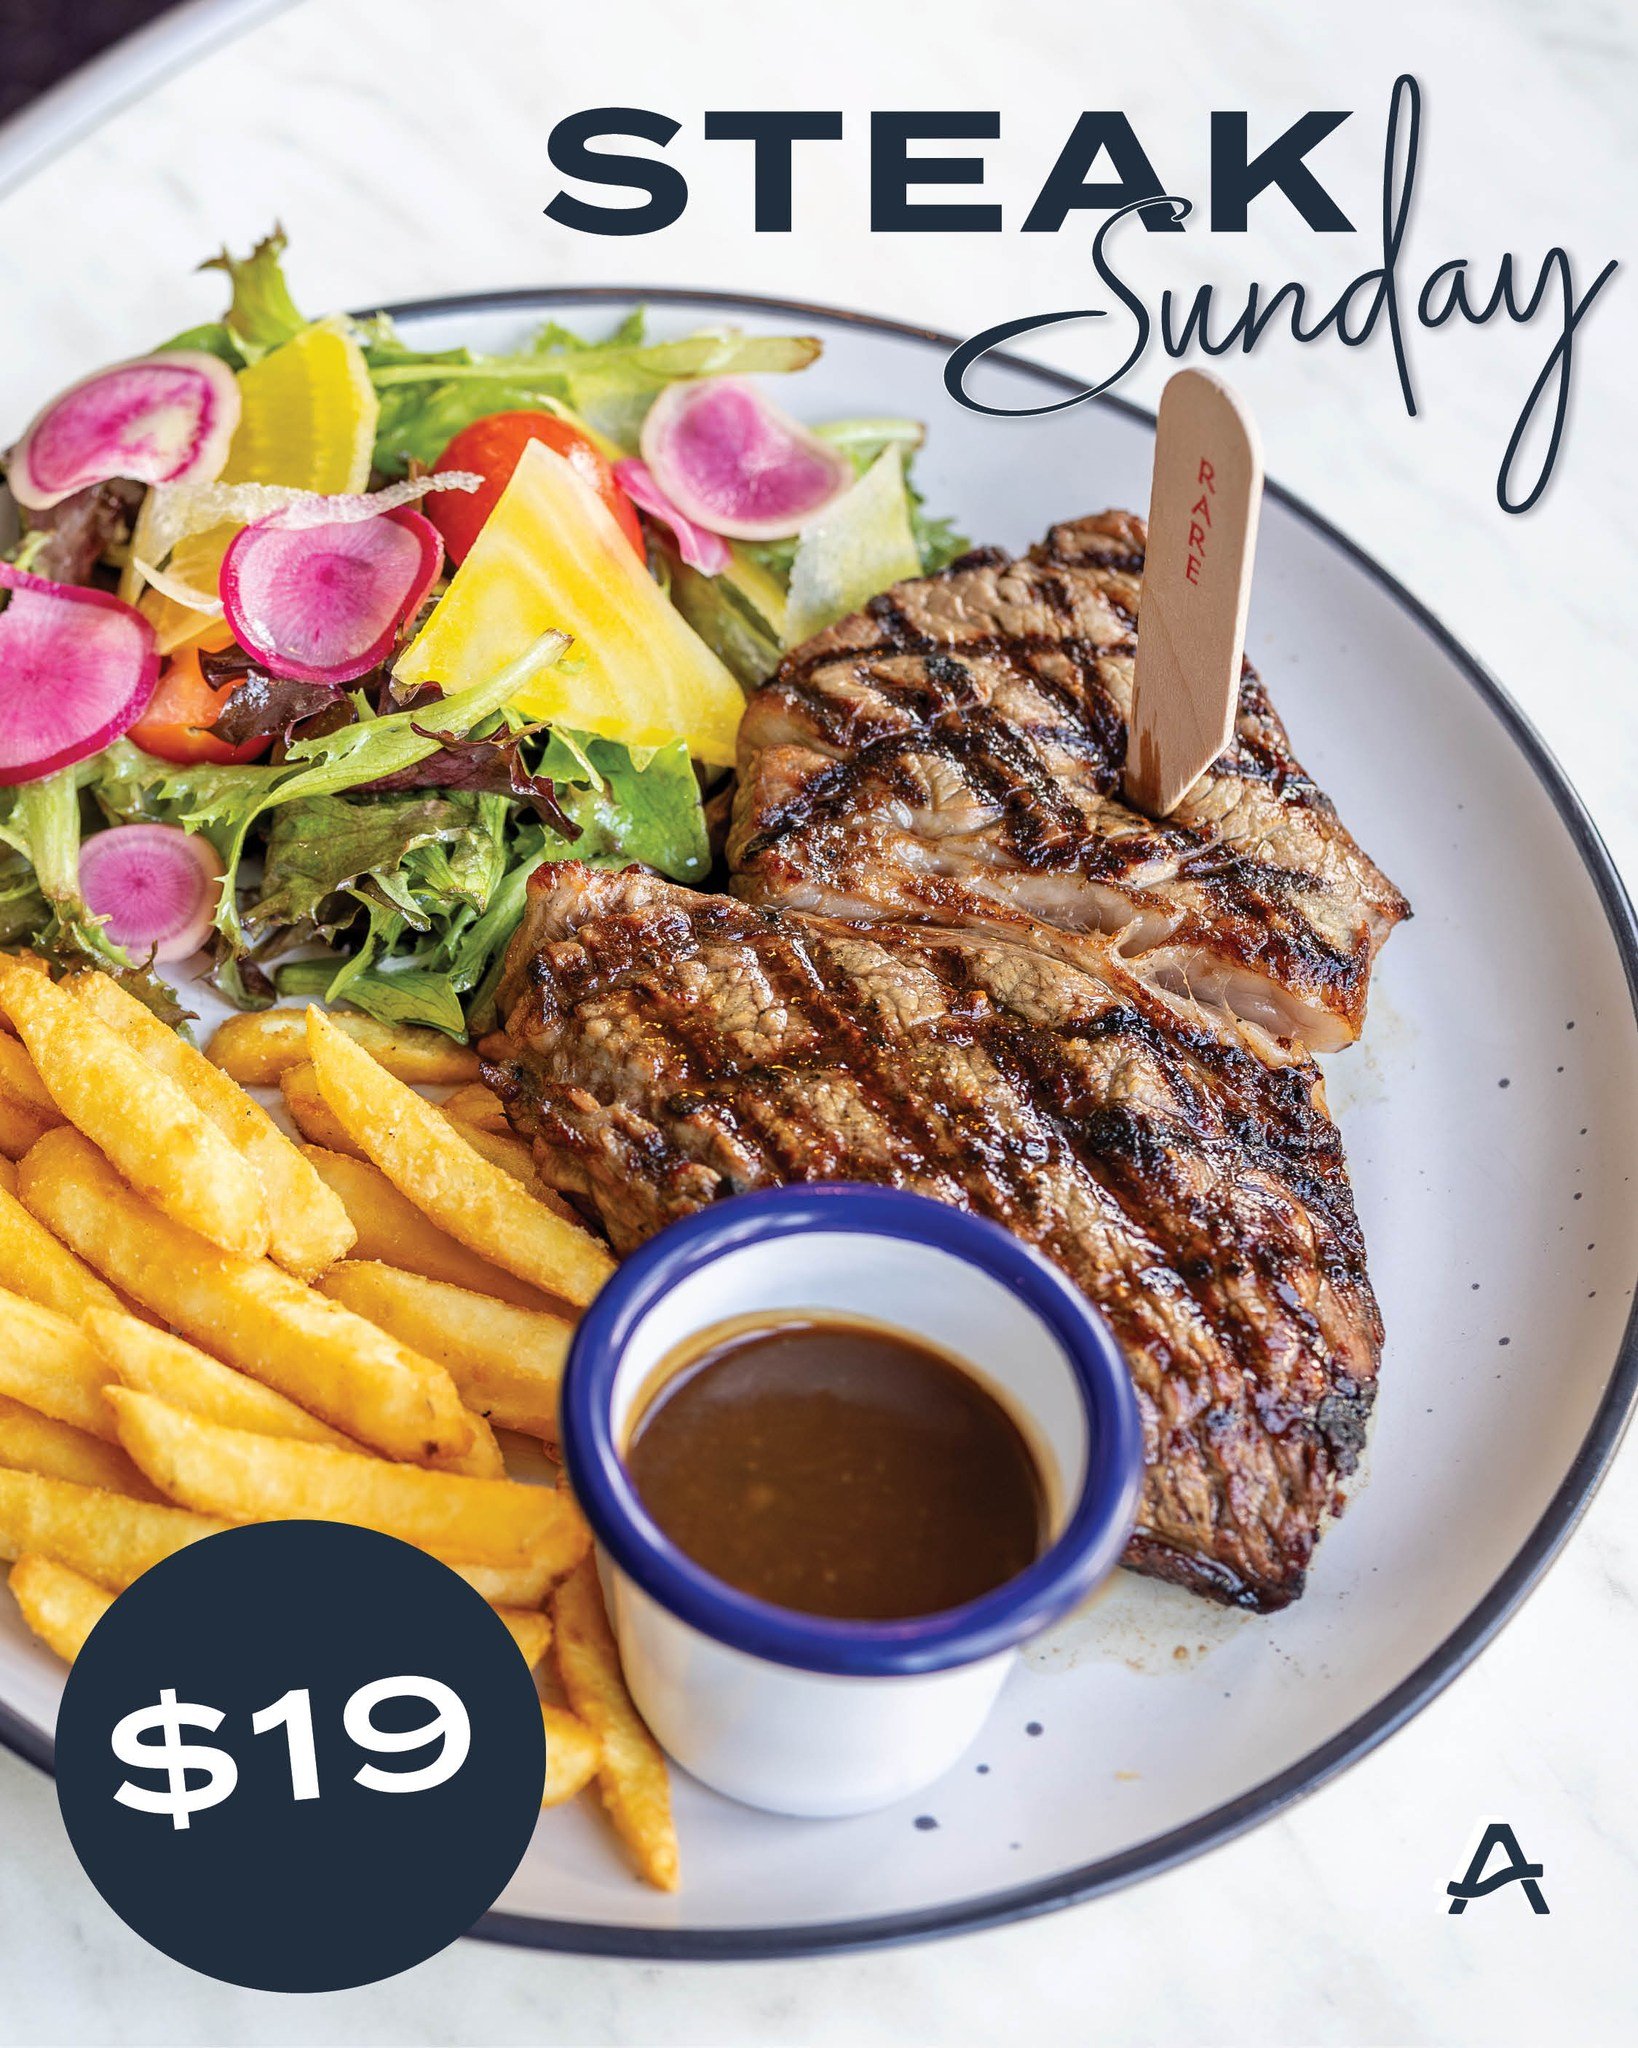 Sizzle into Ashmore Tavern tonight for our $19 Steak Night Special! 🔥

Enjoy a juicy 200g Rump Steak served with beer battered chips and gravy for just $19. Add a refreshing salad for only $2 extra! 🥩🥗

Available EVERY Sunday from 5:30pm to 8:30pm